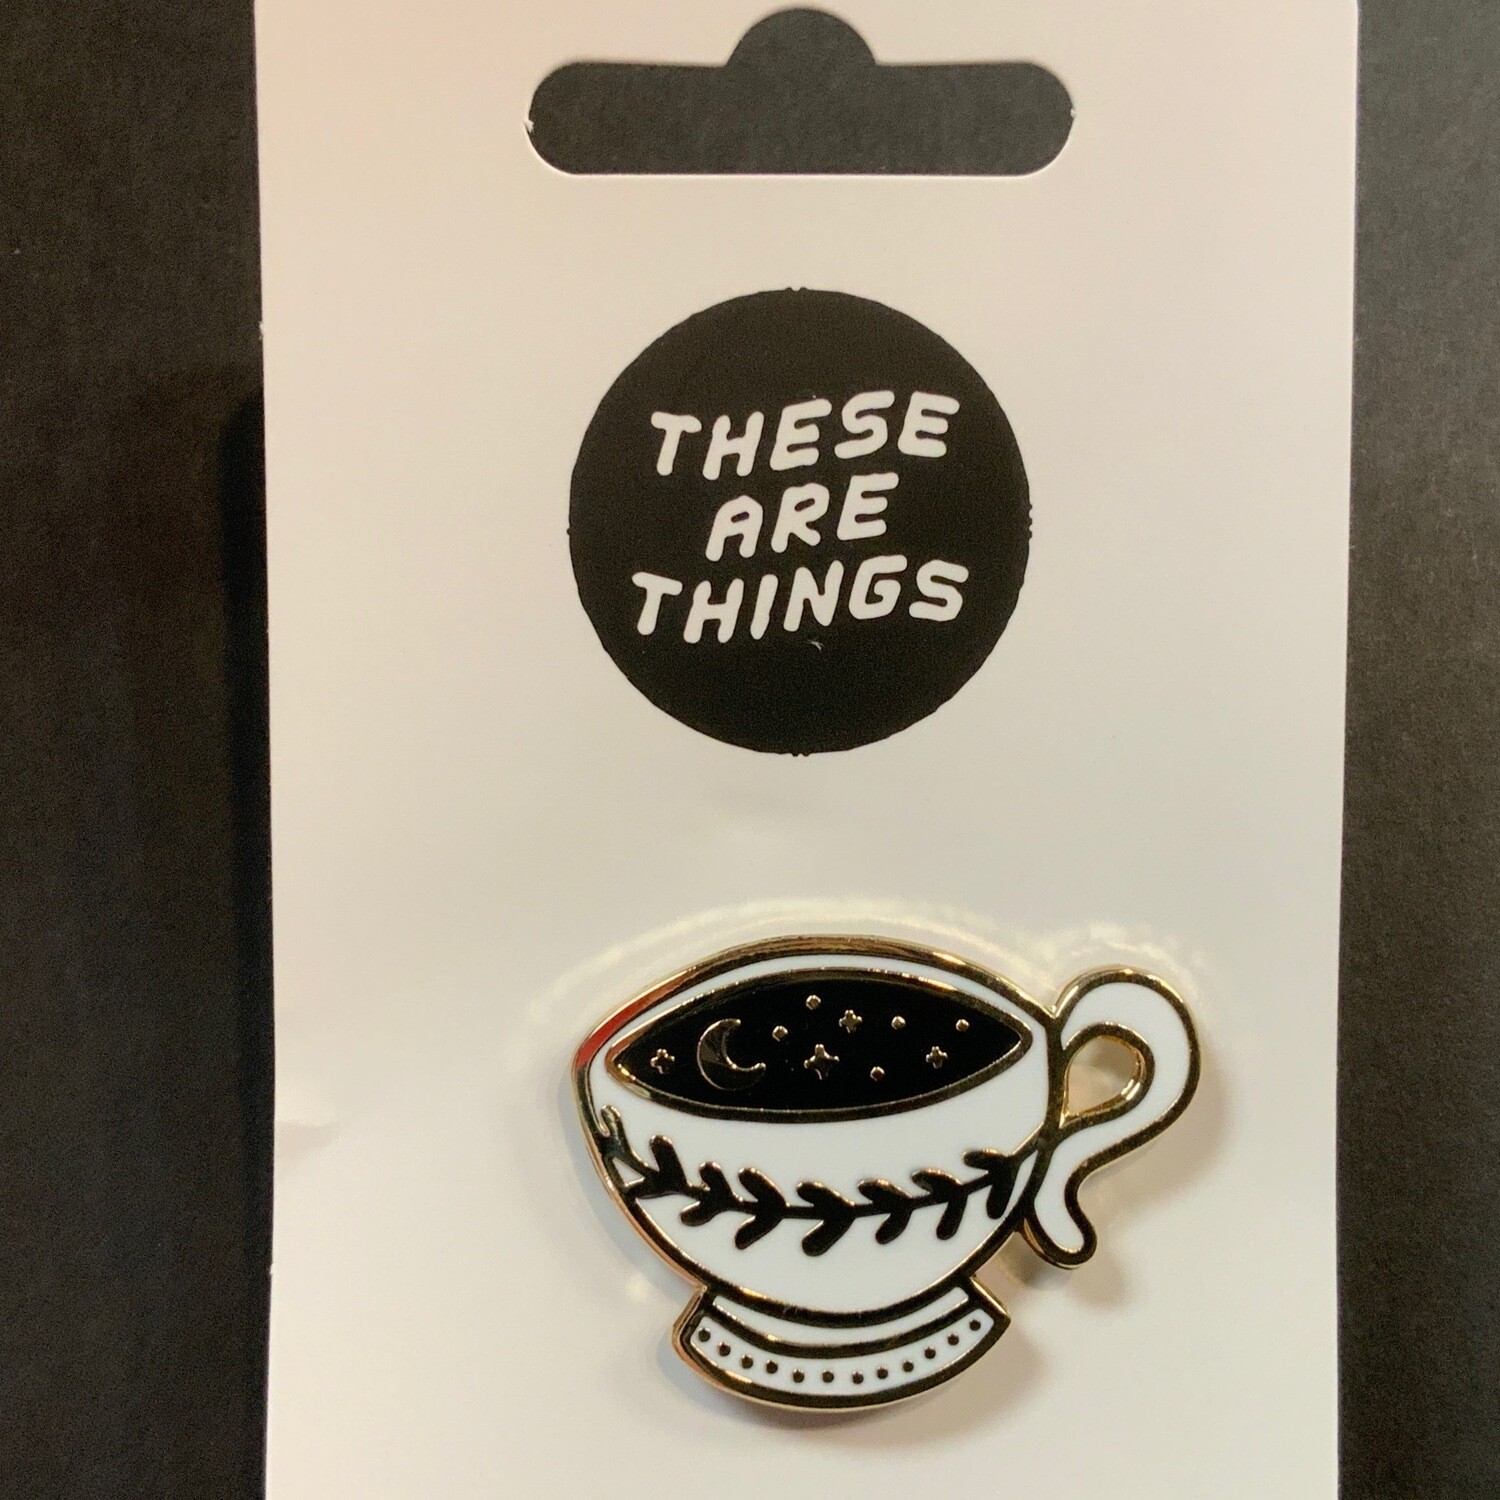 Nighttime Tea Cup - Enamel Pin from These Are Things